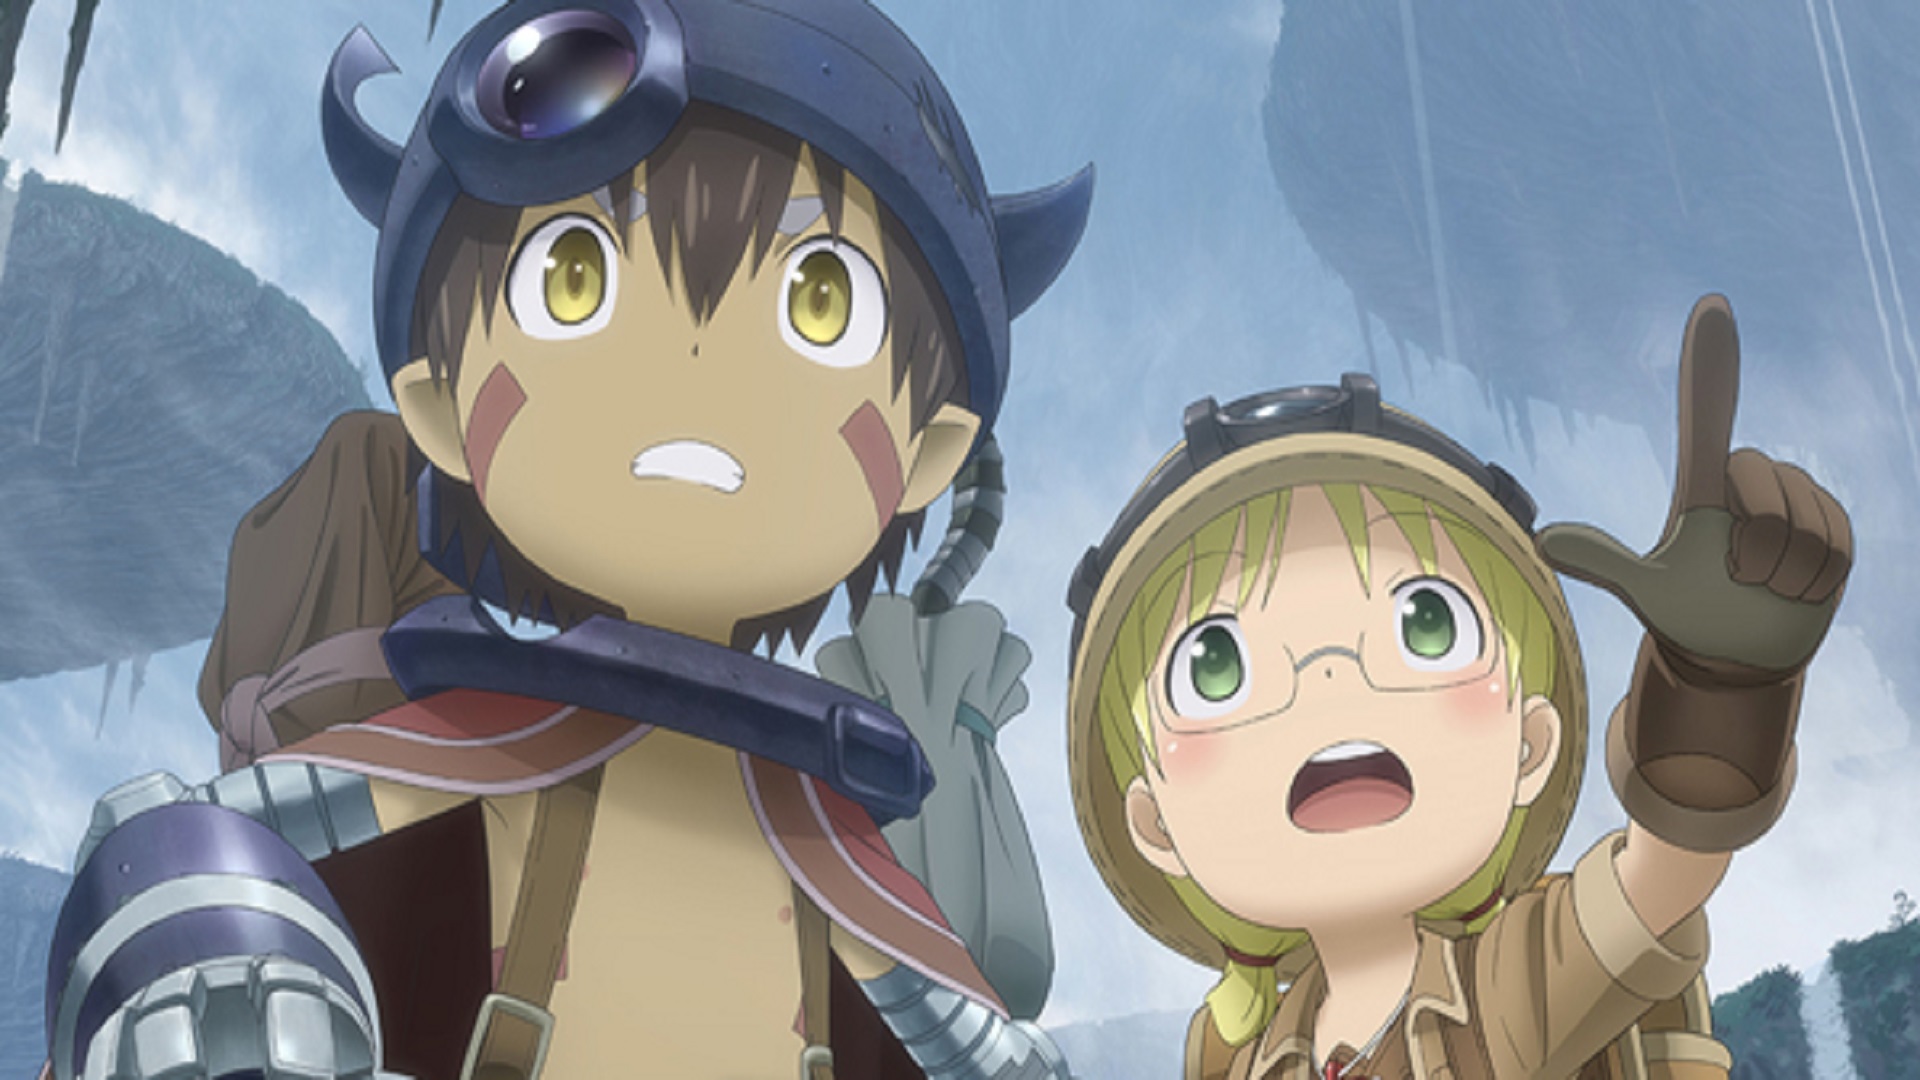 Made in Abyss Anime Announces Season 2, RPG for 2022